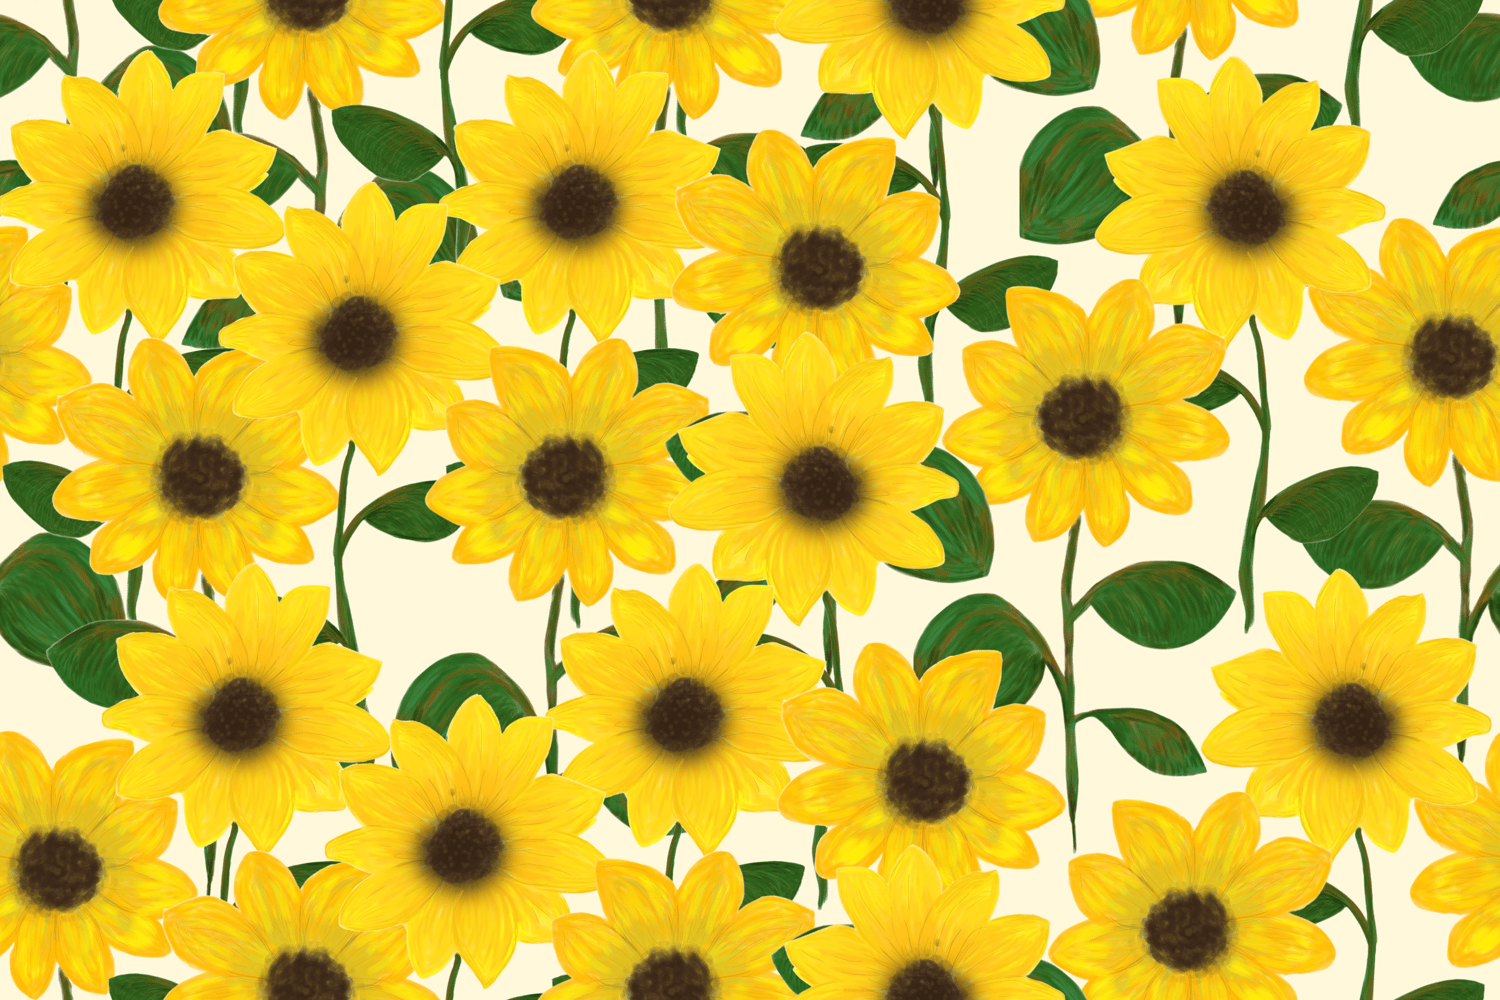 Sunflower garden is a pretty fabric design which I created after being inspired by my garden.